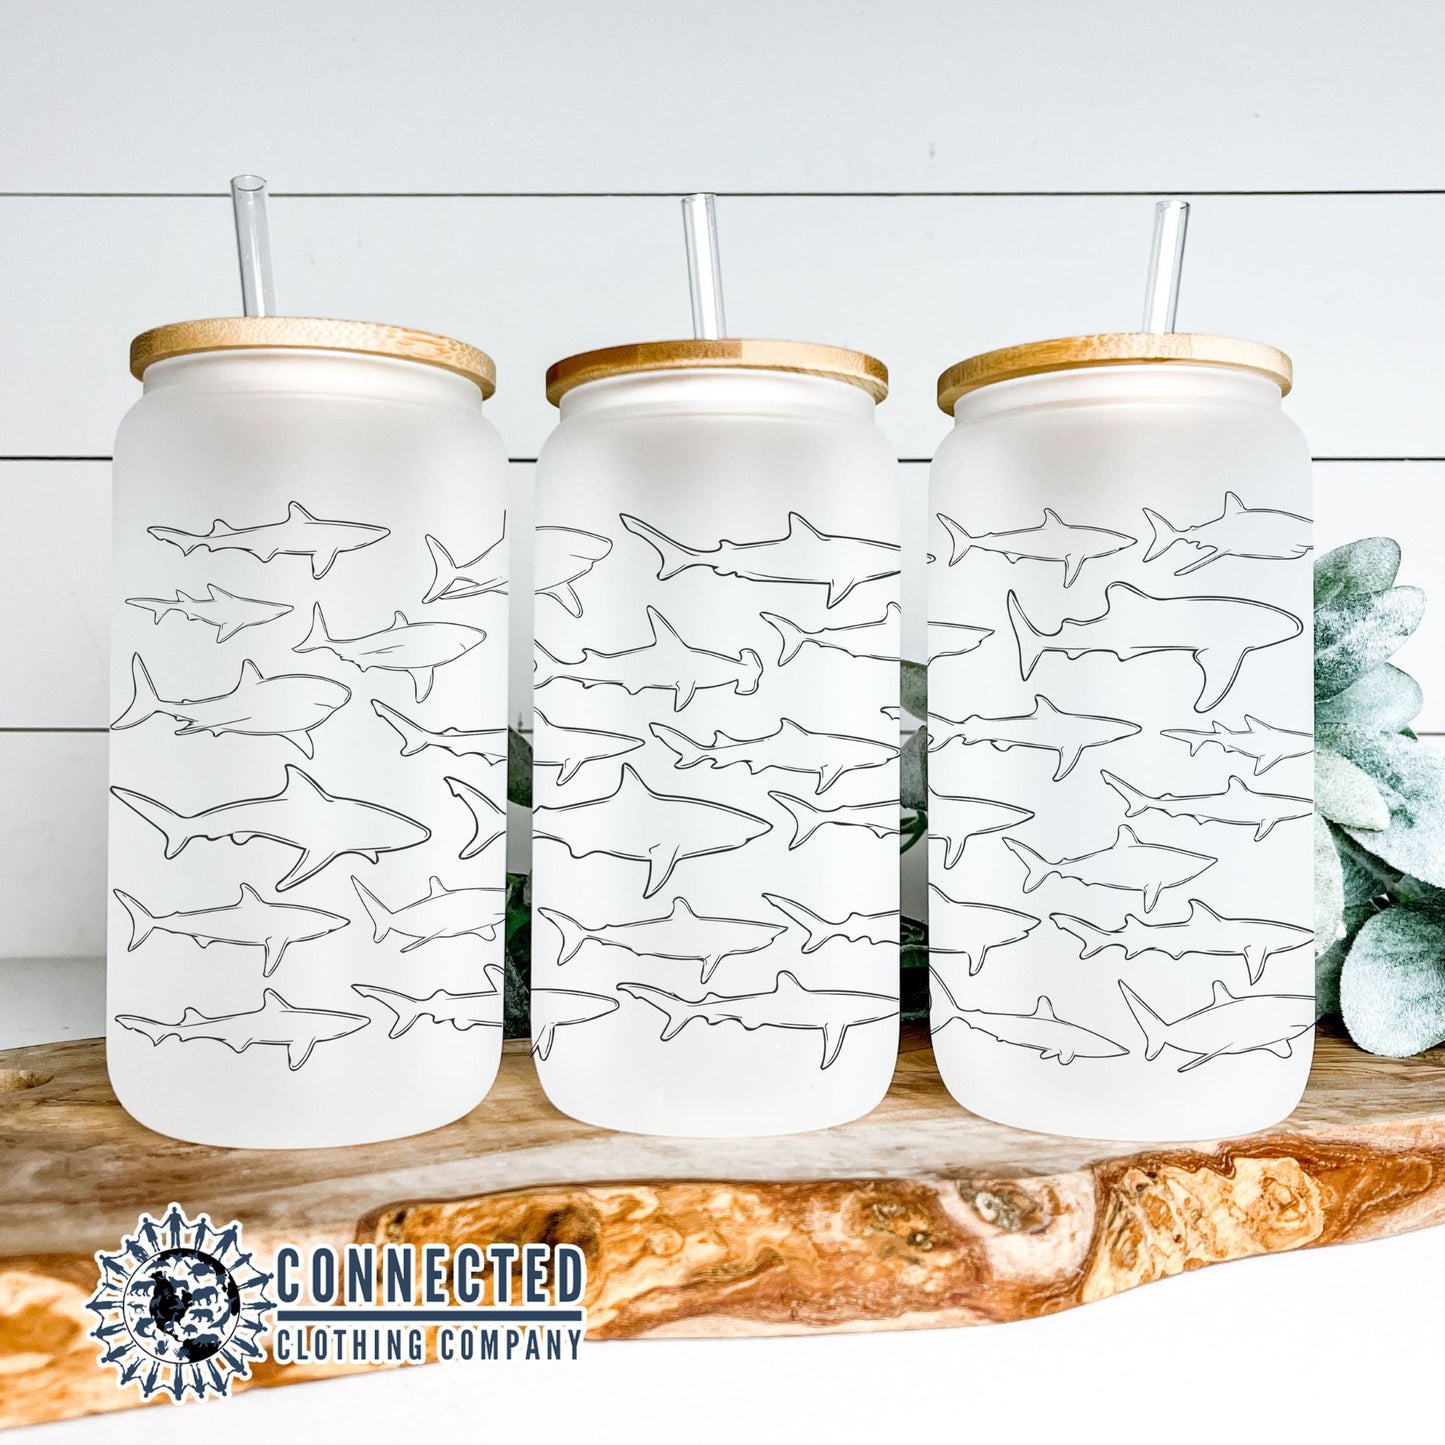 2-Pack Shark Glass Cans - Connected Clothing Company - 10% of proceeds donated to ocean conservation